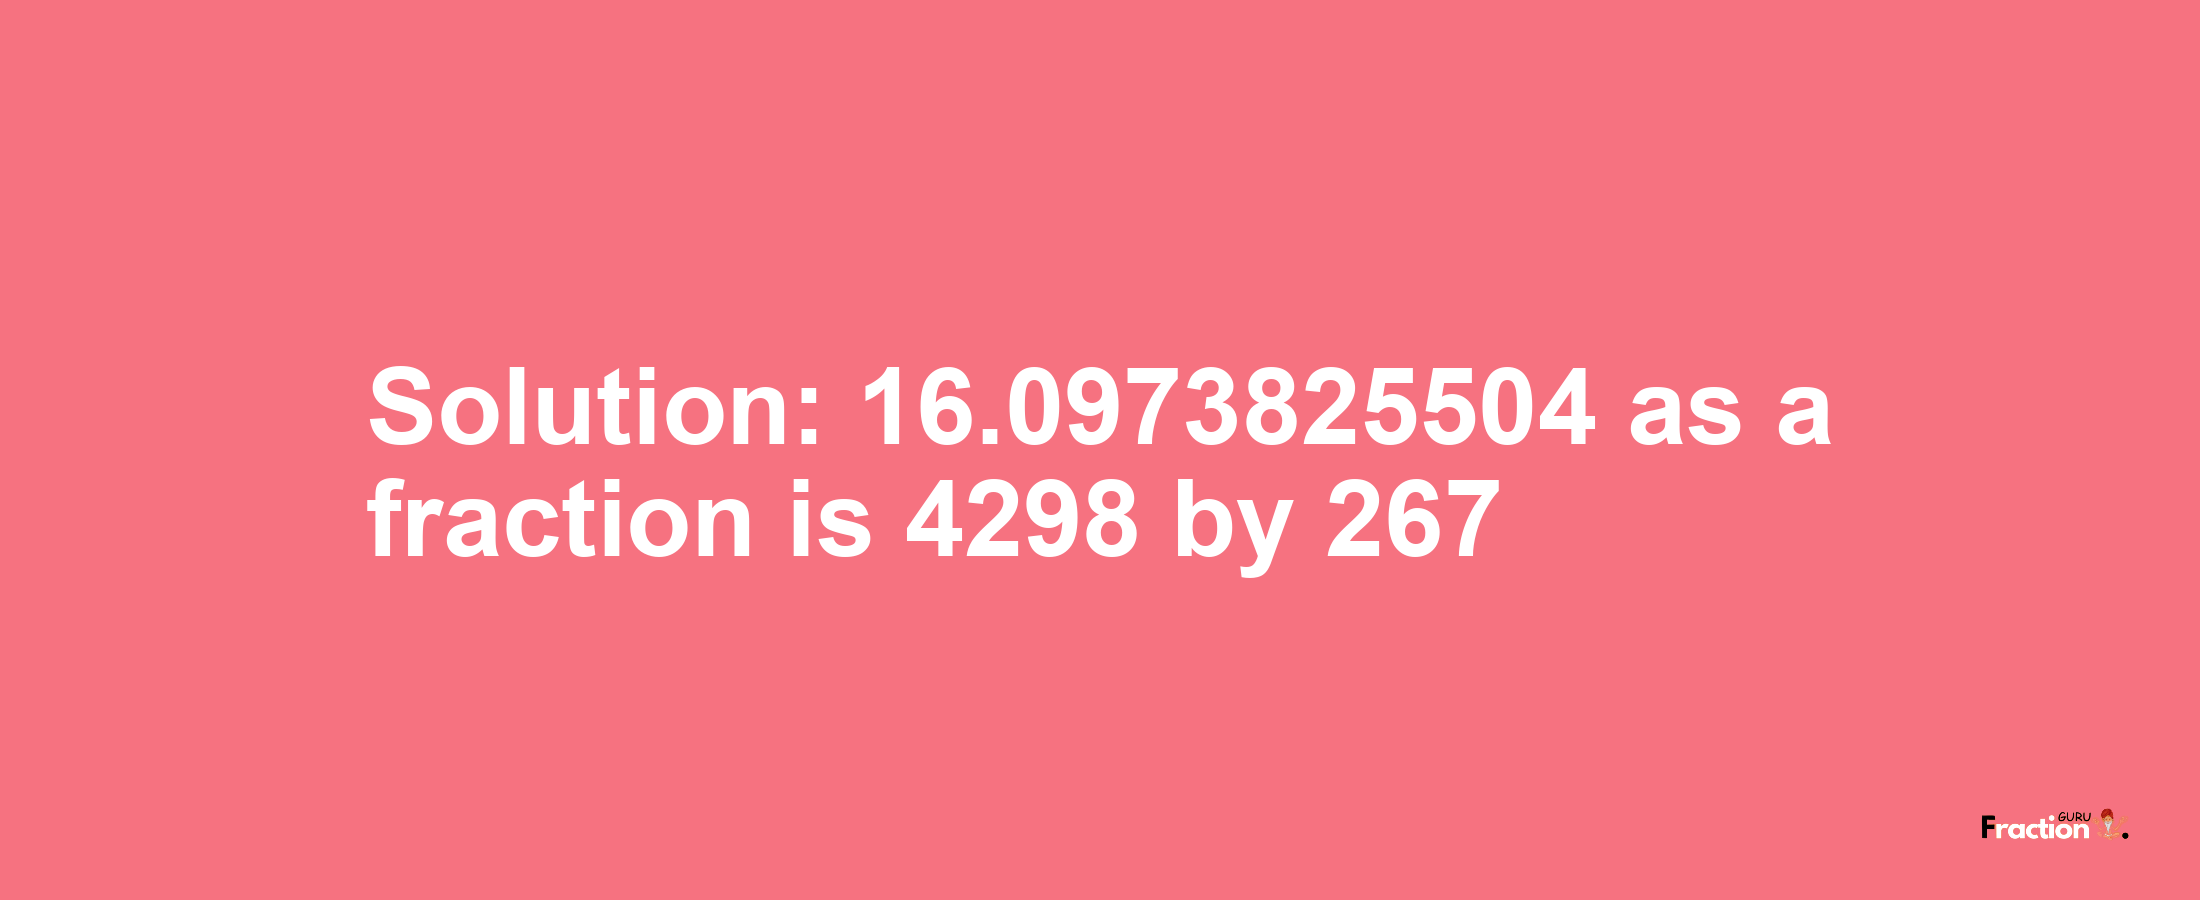 Solution:16.0973825504 as a fraction is 4298/267